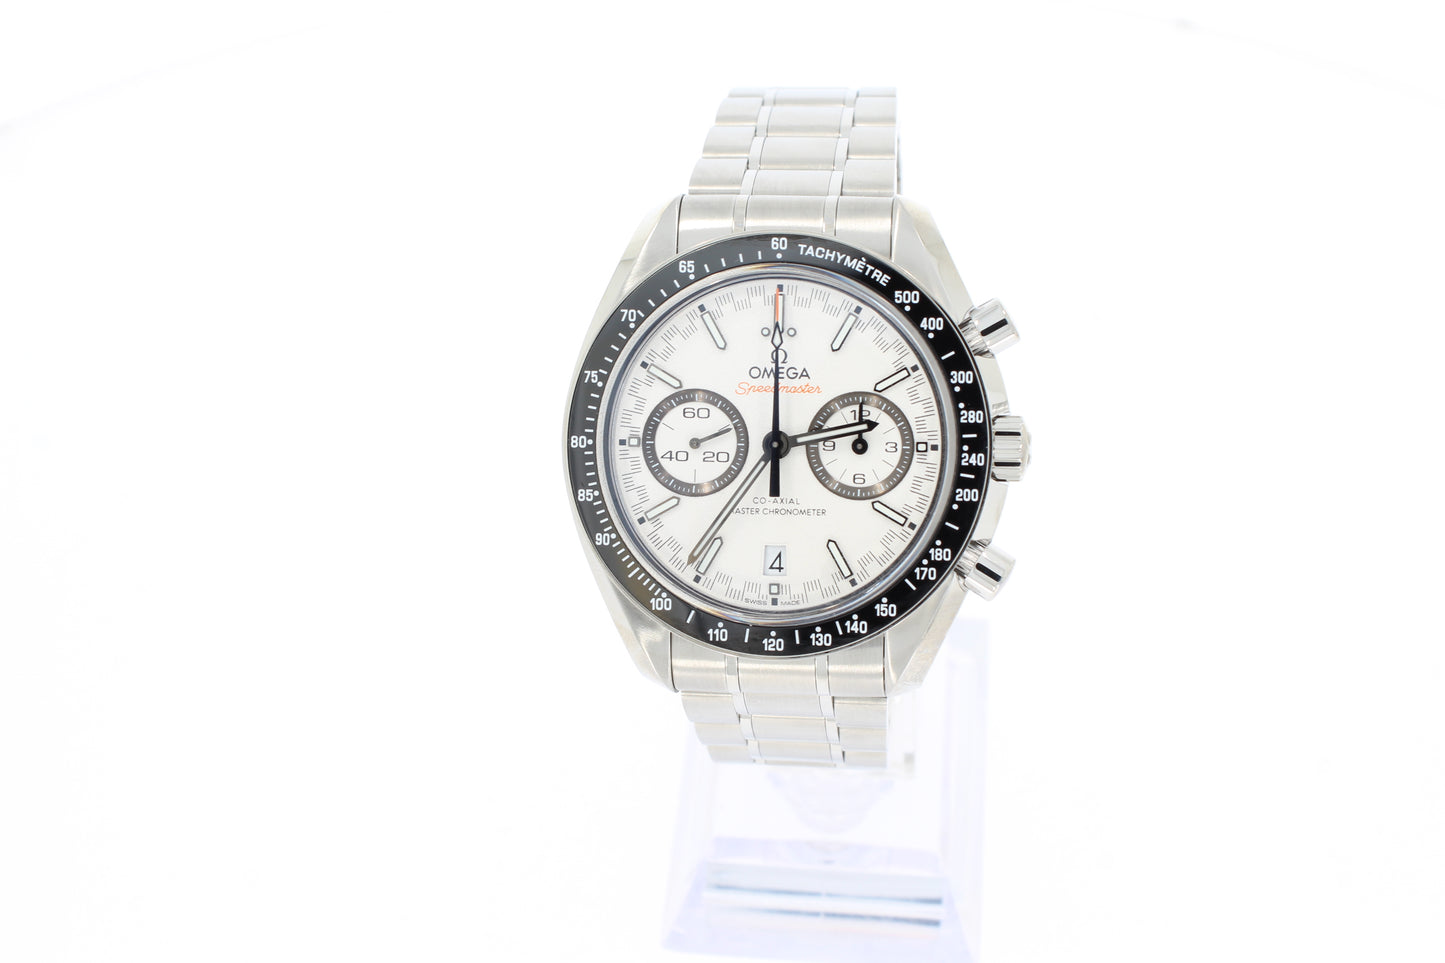 Omega Speedmaster Racing Co-Axial Master Chronograph 44,25mm 329.30.44.51.04.001